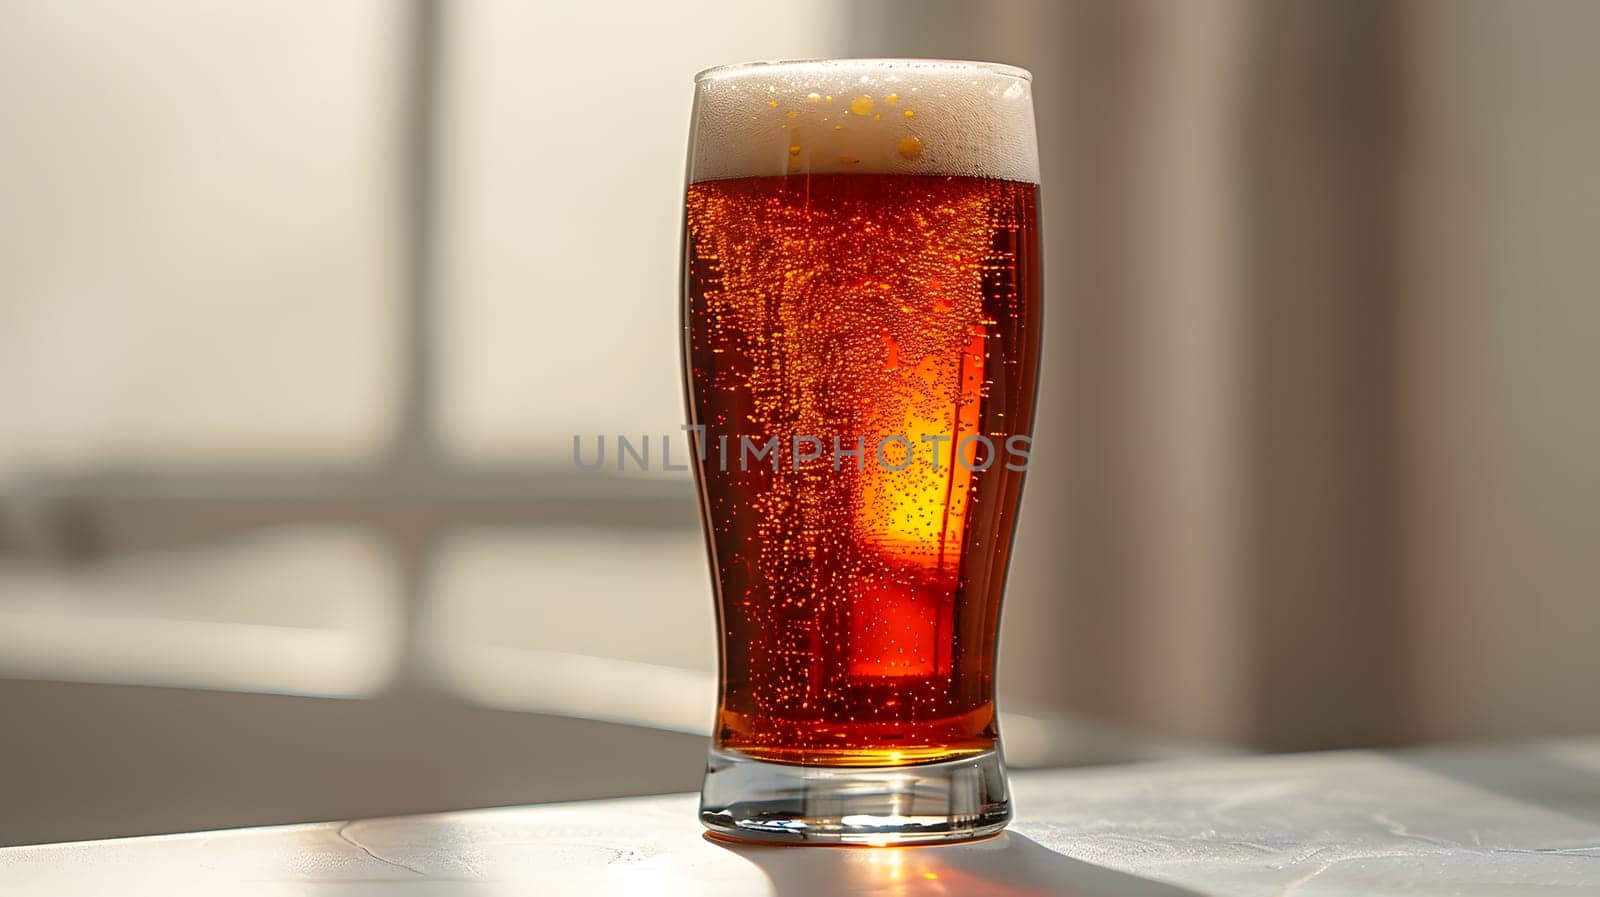 A beer glass is placed on a table by a window, showcasing the stemware and liquid inside. The highball glass reflects the automotive lighting